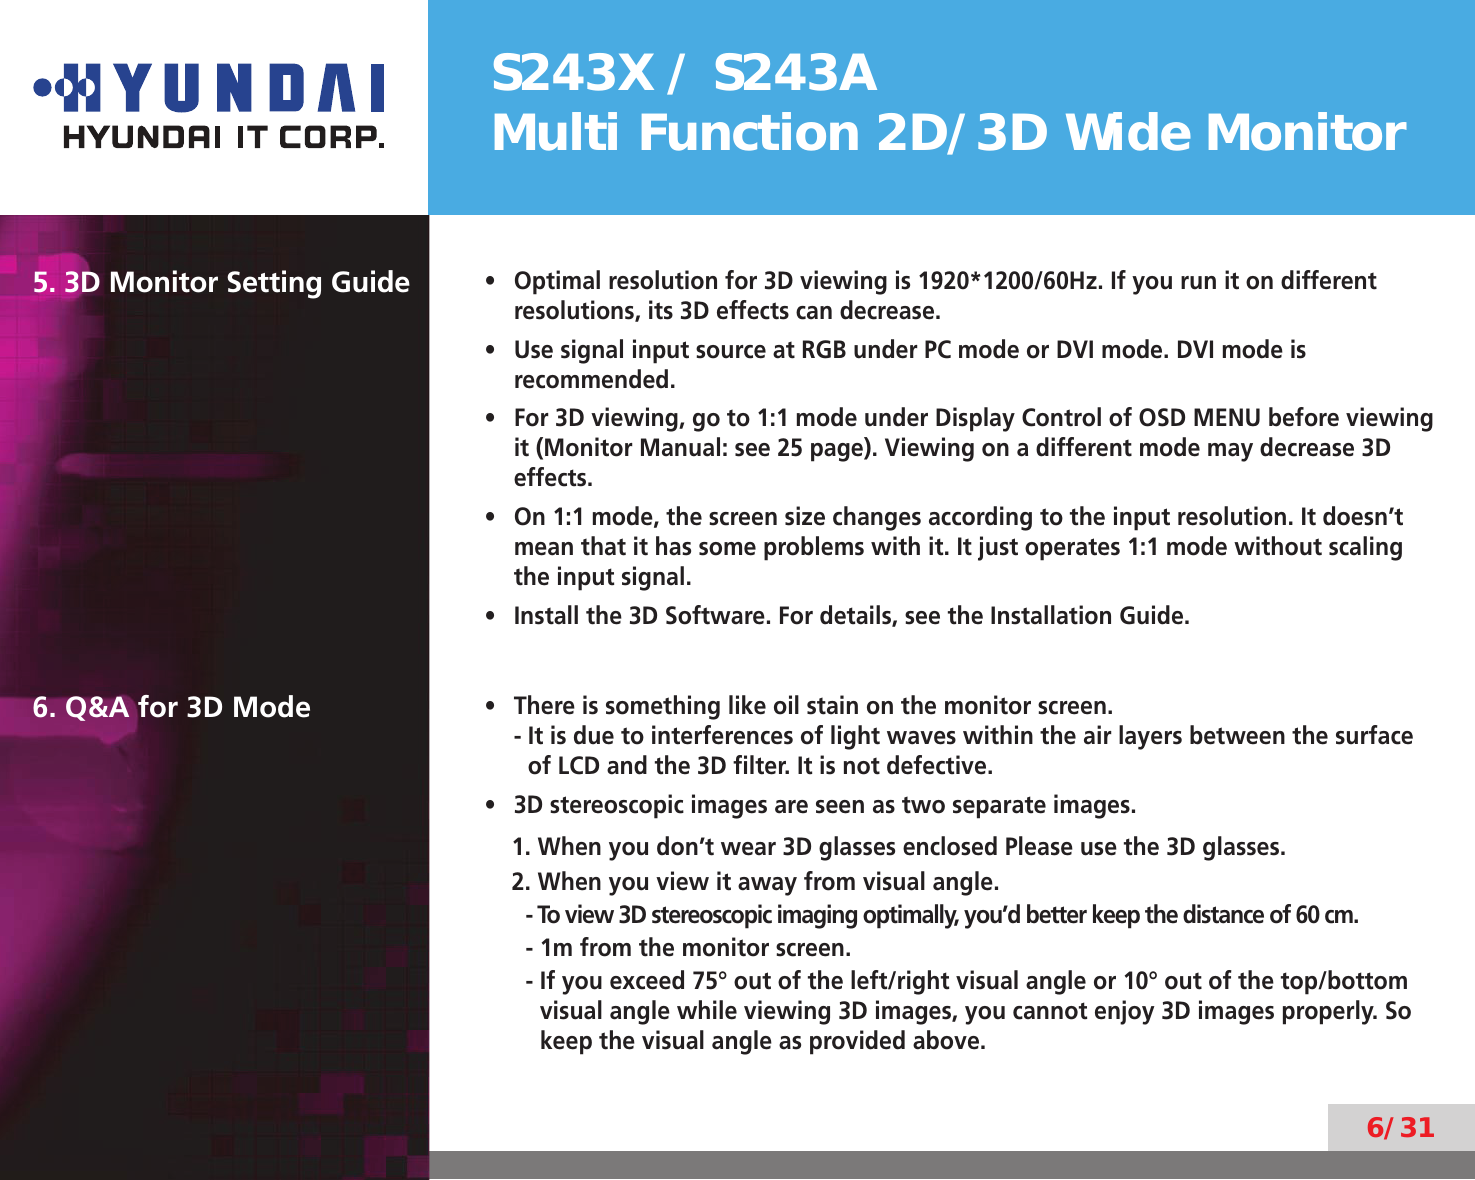 S243X / S243AMulti Function 2D/3D Wide Monitor6/315. 3D Monitor Setting GuideOptimal resolution for 3D viewing is 1920*1200/60Hz. If you run it on different • resolutions, its 3D effects can decrease.Use signal input source at RGB under PC mode or DVI mode. DVI mode is • recommended.For 3D viewing, go to 1:1 mode under Display Control of OSD MENU before viewing • it (Monitor Manual: see 25 page). Viewing on a different mode may decrease 3D effects.On 1:1 mode, the screen size changes according to the input resolution. It doesn’t • mean that it has some problems with it. It just operates 1:1 mode without scaling the input signal.Install the 3D Software. For details, see the Installation Guide.• 6. Q&amp;A for 3D Mode There is something like oil stain on the monitor screen.                                                            • -  It is due to interferences of light waves within the air layers between the surface of LCD and the 3D ﬁlter. It is not defective.3D stereoscopic images are seen as two separate images.• 1. When you don’t wear 3D glasses enclosed Please use the 3D glasses.2. When you view it away from visual angle.-  To view 3D stereoscopic imaging optimally, you’d better keep the distance of 60 cm.- 1m from the monitor screen.-  If you exceed 75° out of the left/right visual angle or 10° out of the top/bottom visual angle while viewing 3D images, you cannot enjoy 3D images properly. So keep the visual angle as provided above.